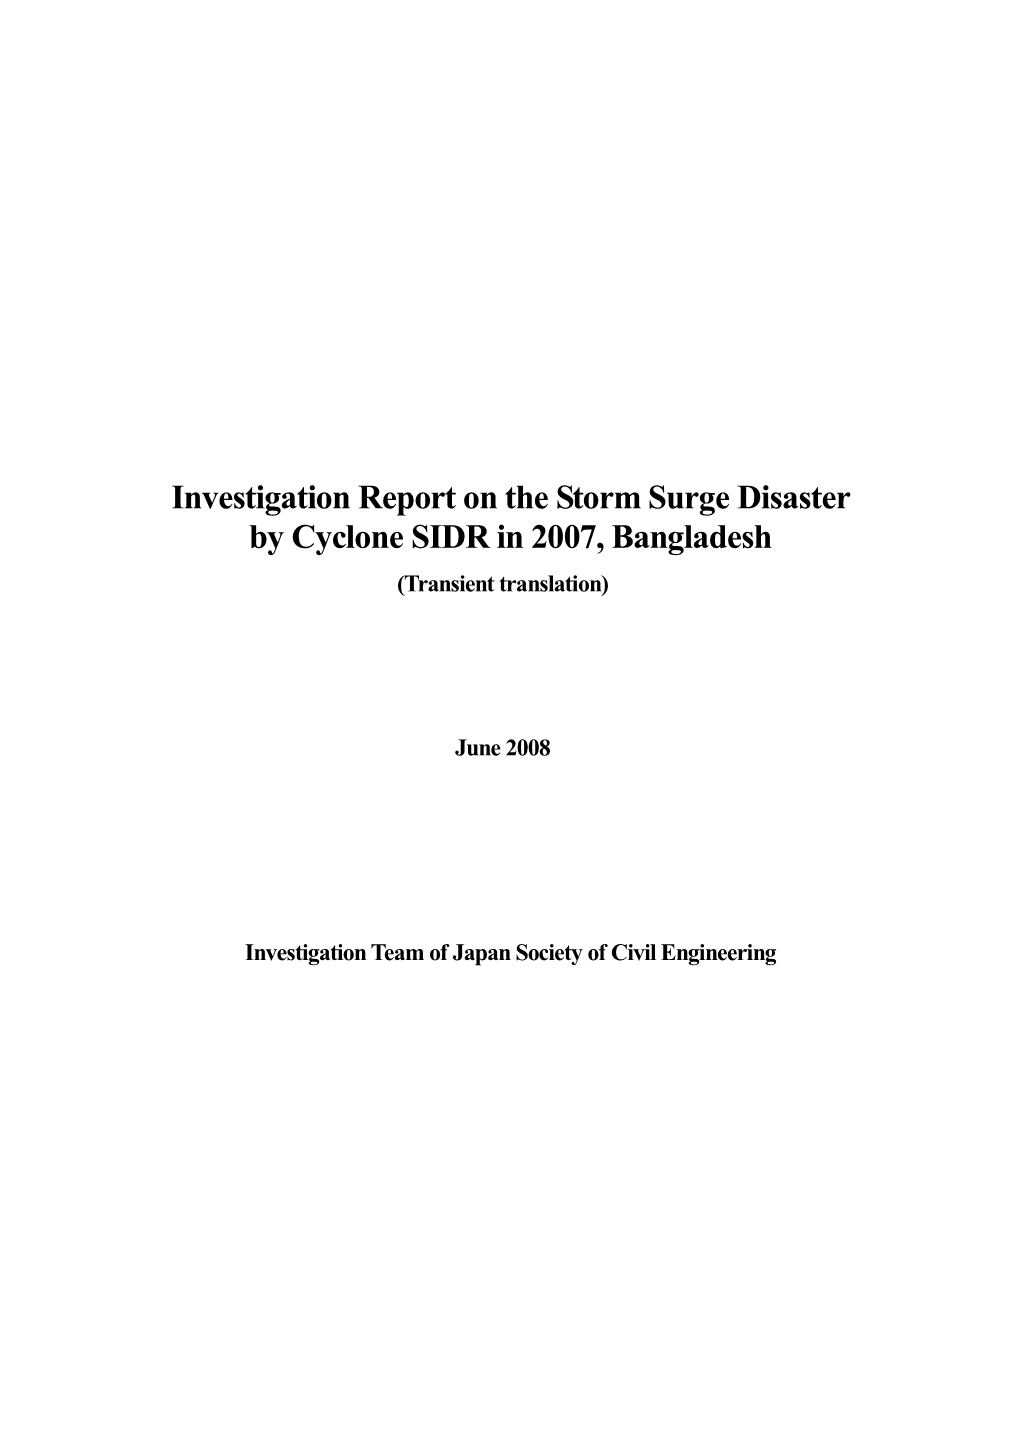 Investigation Report on the Storm Surge Disaster by Cyclone SIDR in 2007, Bangladesh (Transient Translation)